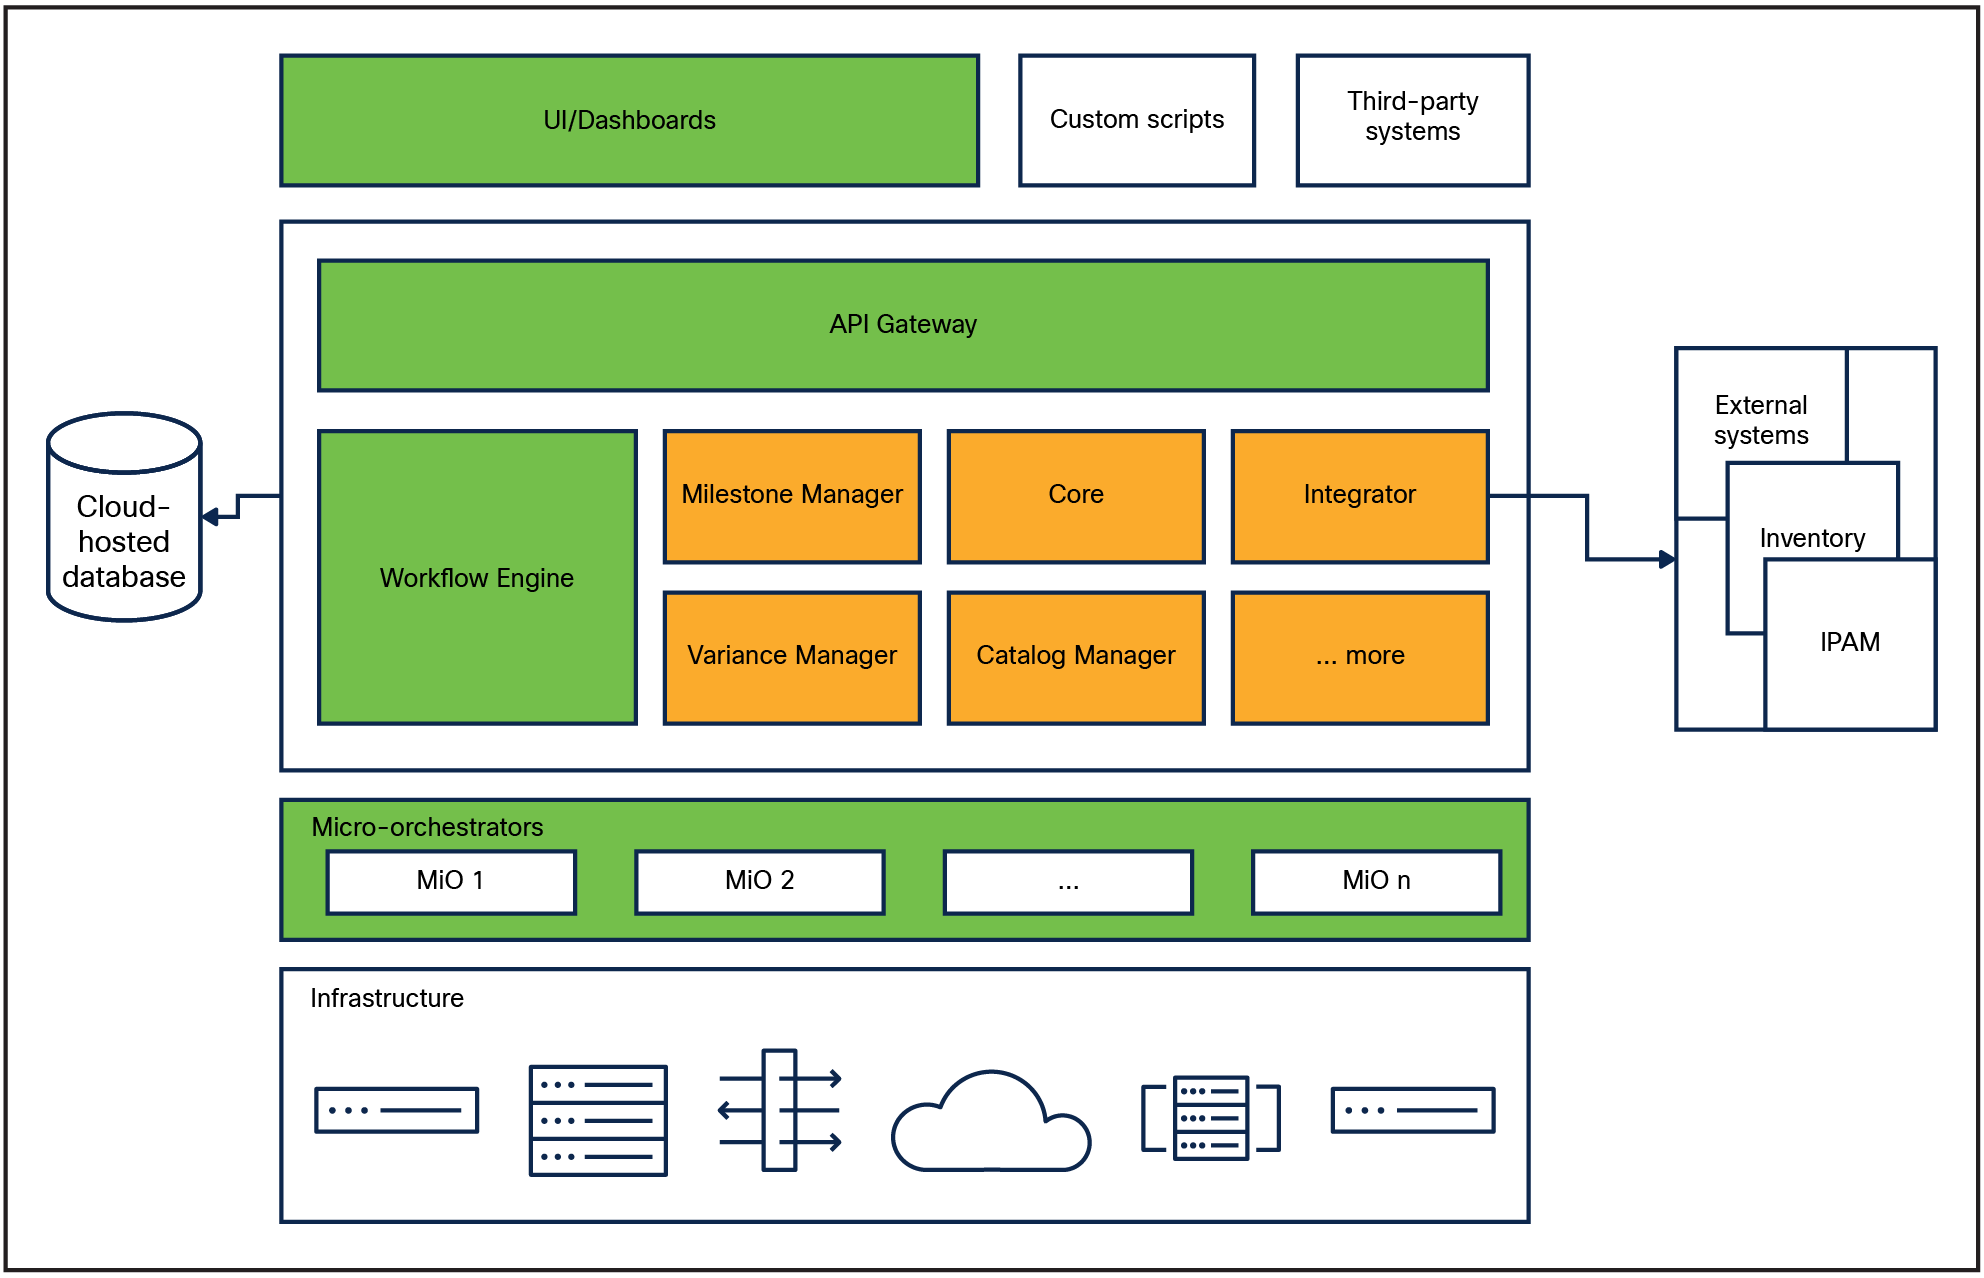 Components of the solution